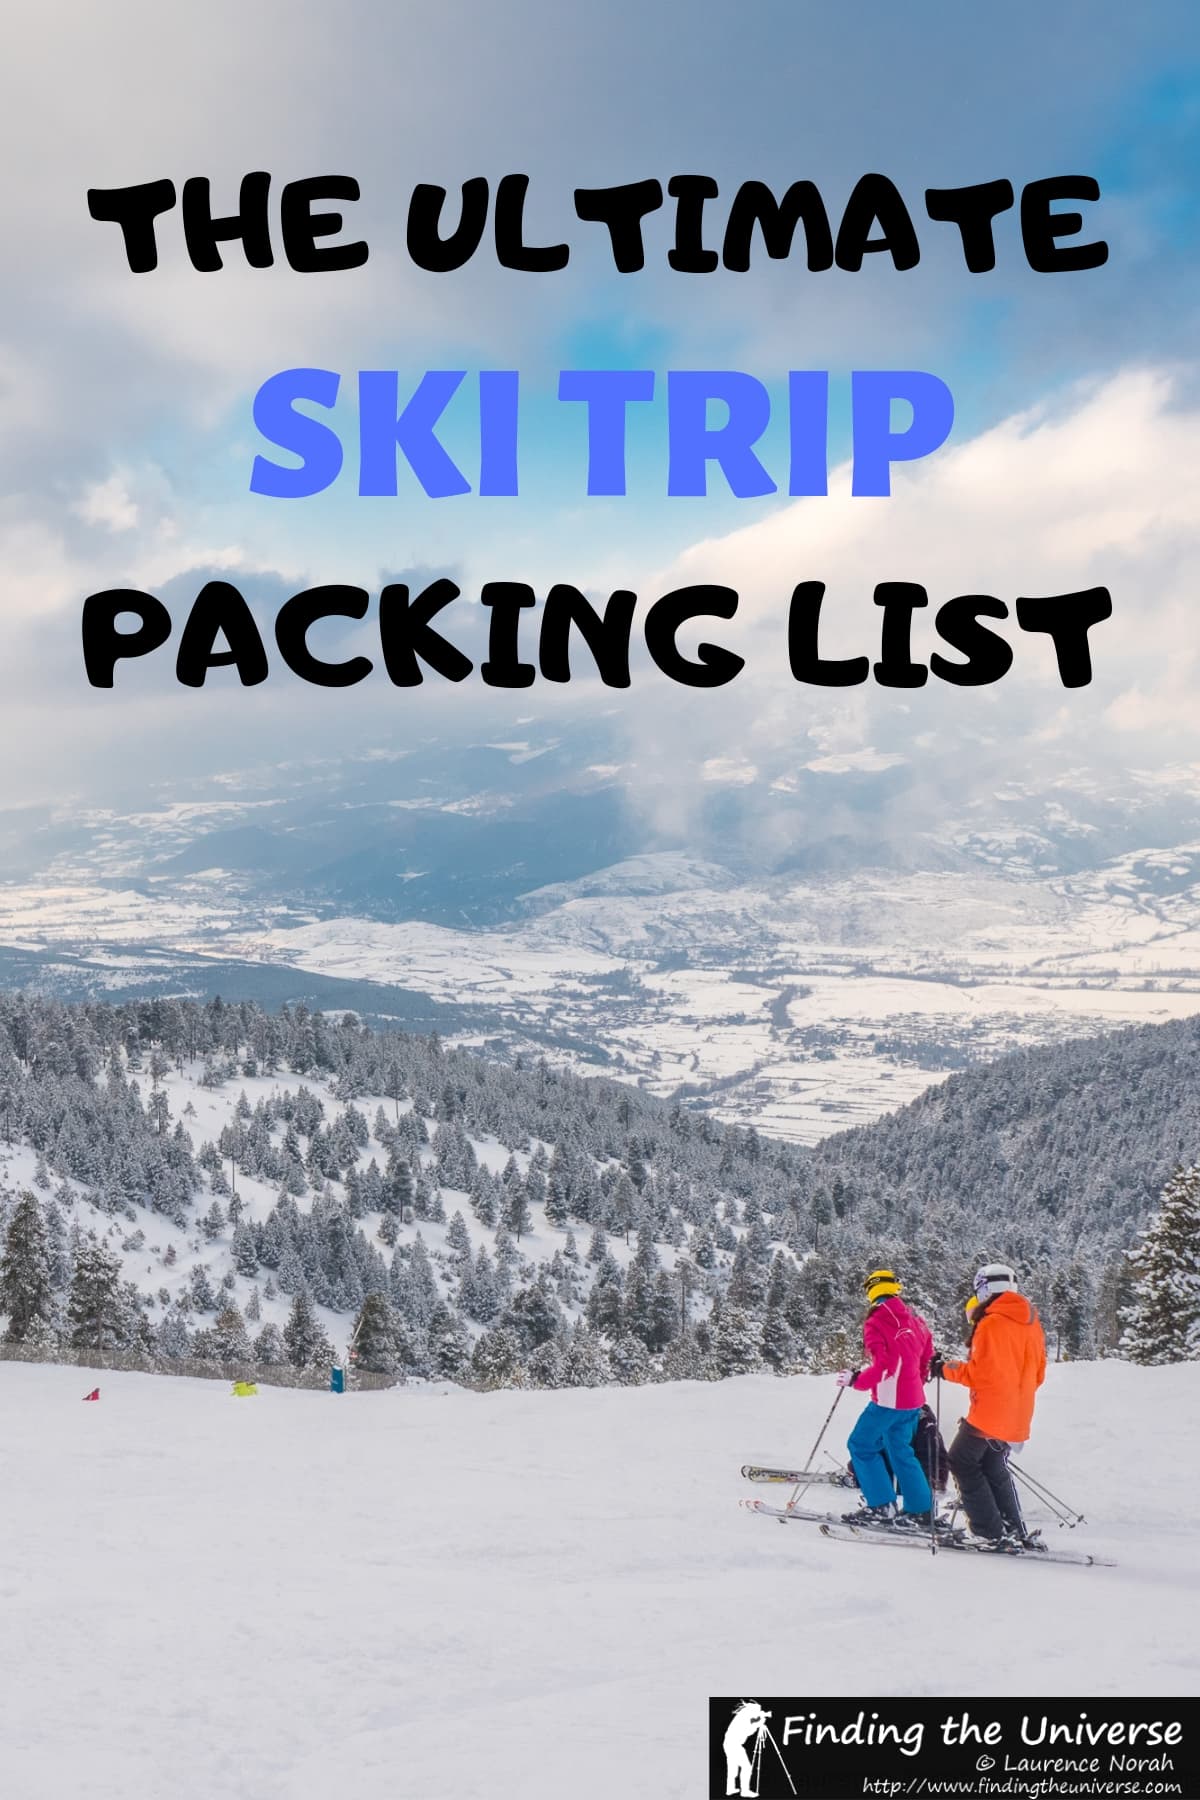 Detailed guide to what to pack for a ski trip, including skiing equipment, suggested clothes, and everything else! #travel #skiing #ski #packing #packinglist